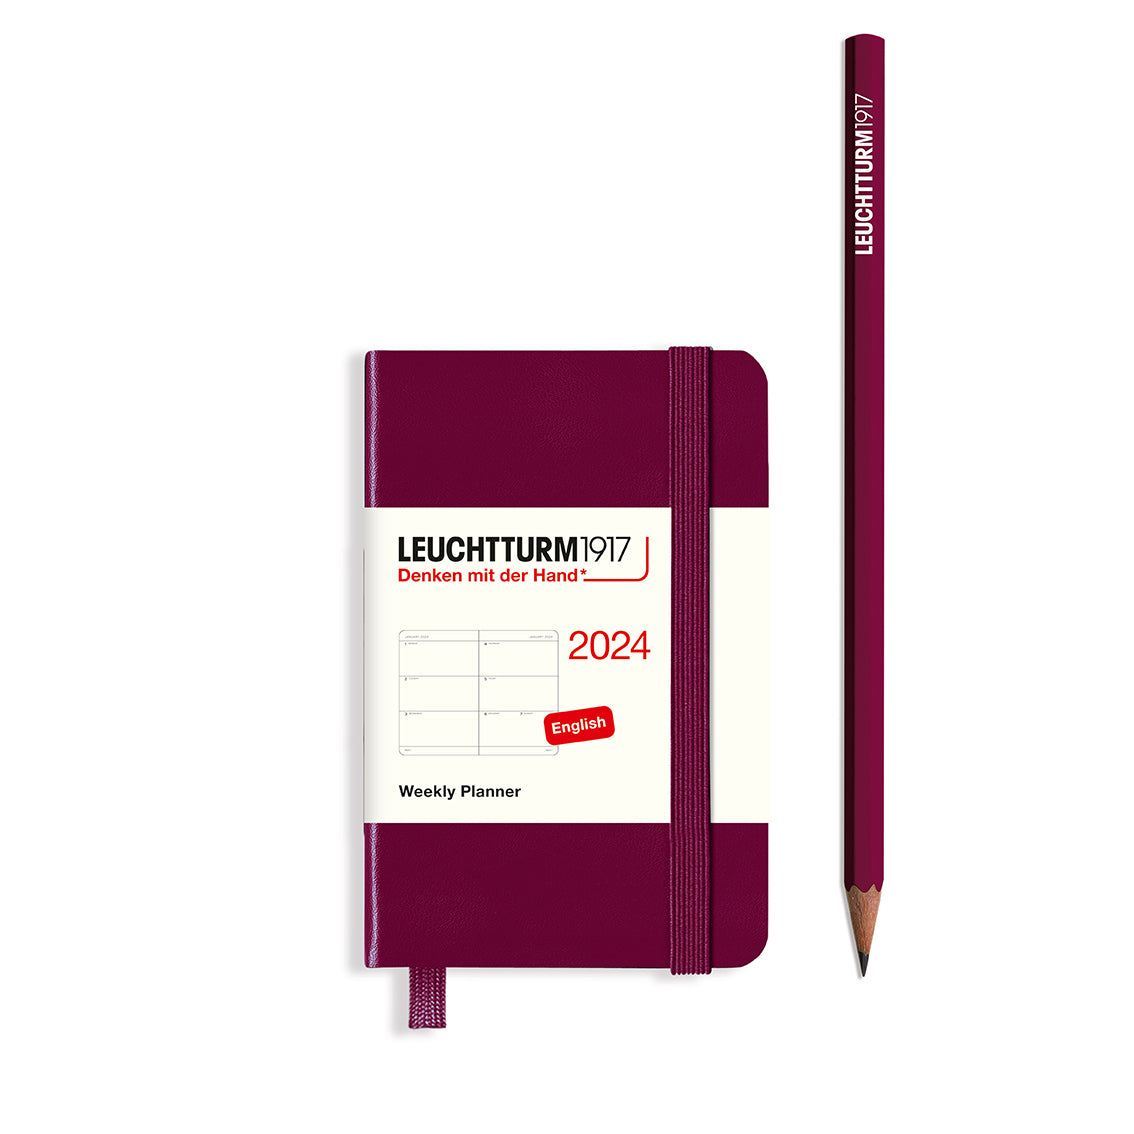 An image of a burgundy planner with a burgundy elastic band holding it together and a cream paper wrap around the middle stating the business name Leuchtturm1917, that it is for the year 2024, it is a weekly planner, is A7 in size and an English language version. It has an image on the wrap showing the inside layout which is a week spread across 2 pages. A burgundy pencil is shown at the side of the planner.